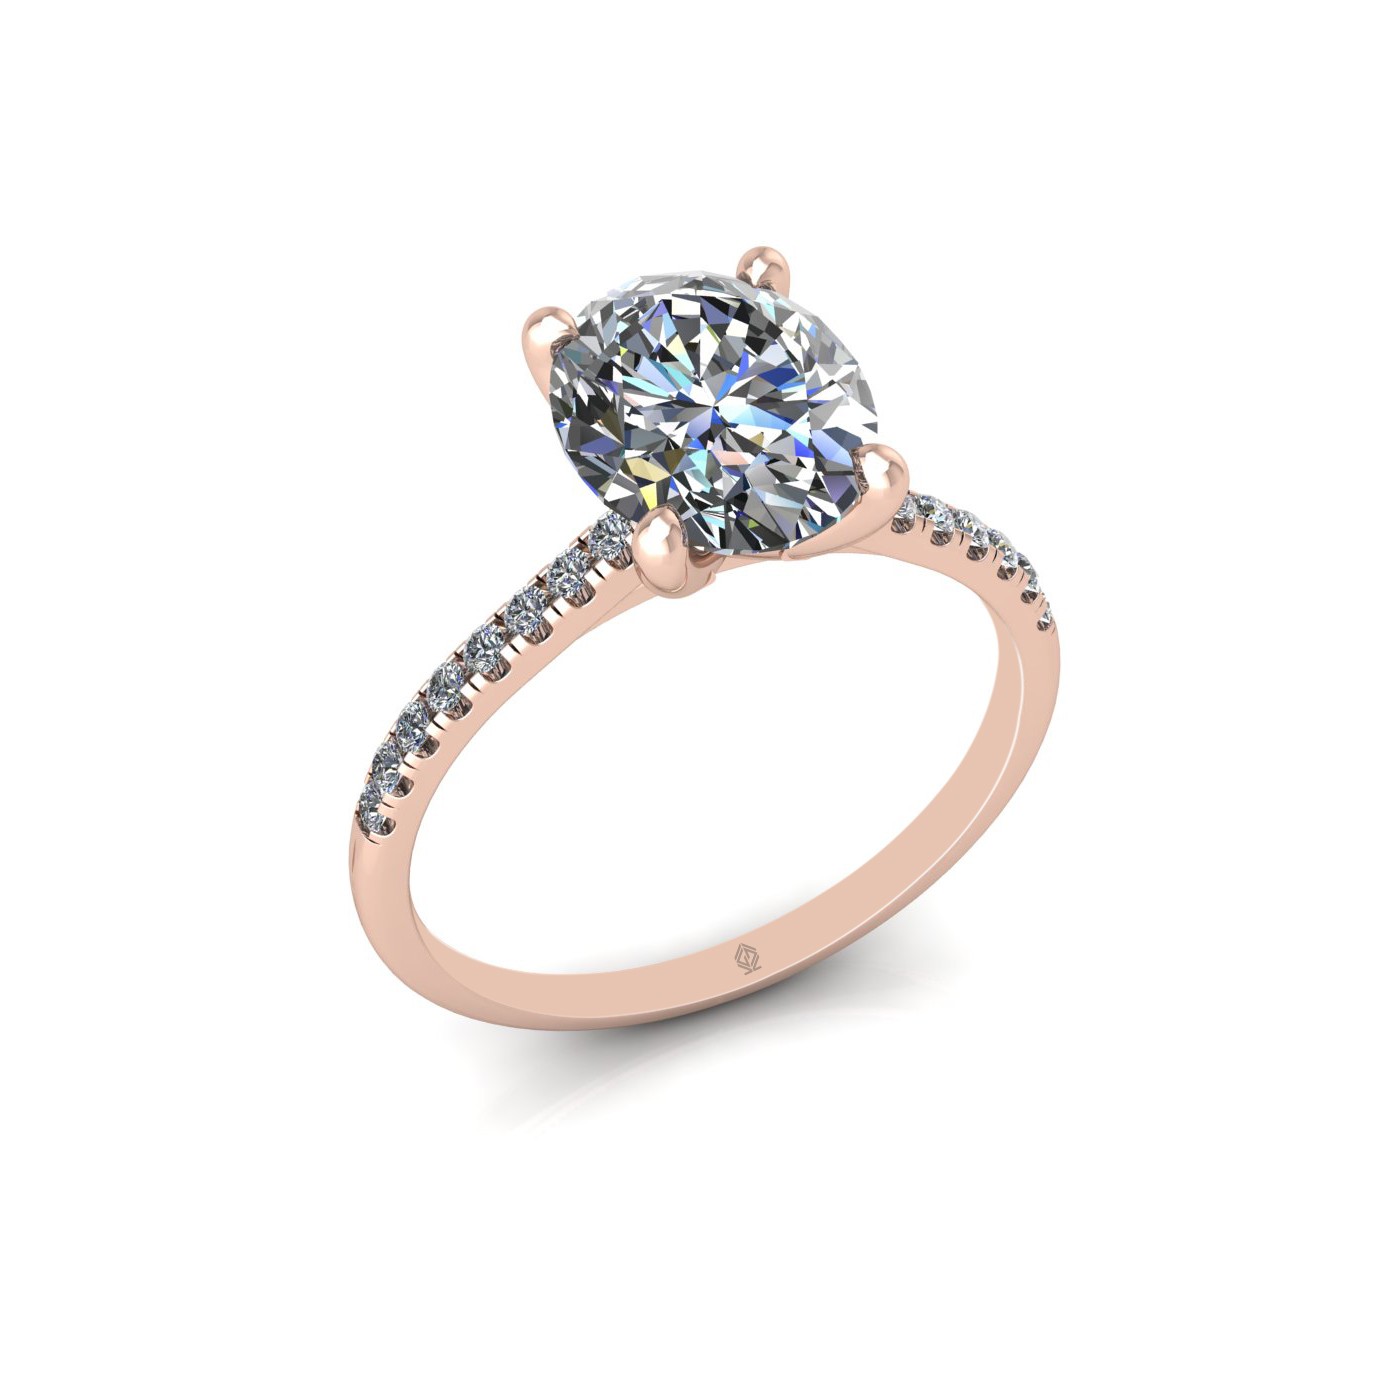 18k rose gold  2,00 ct 4 prongs oval cut diamond engagement ring with whisper thin pavÉ set band